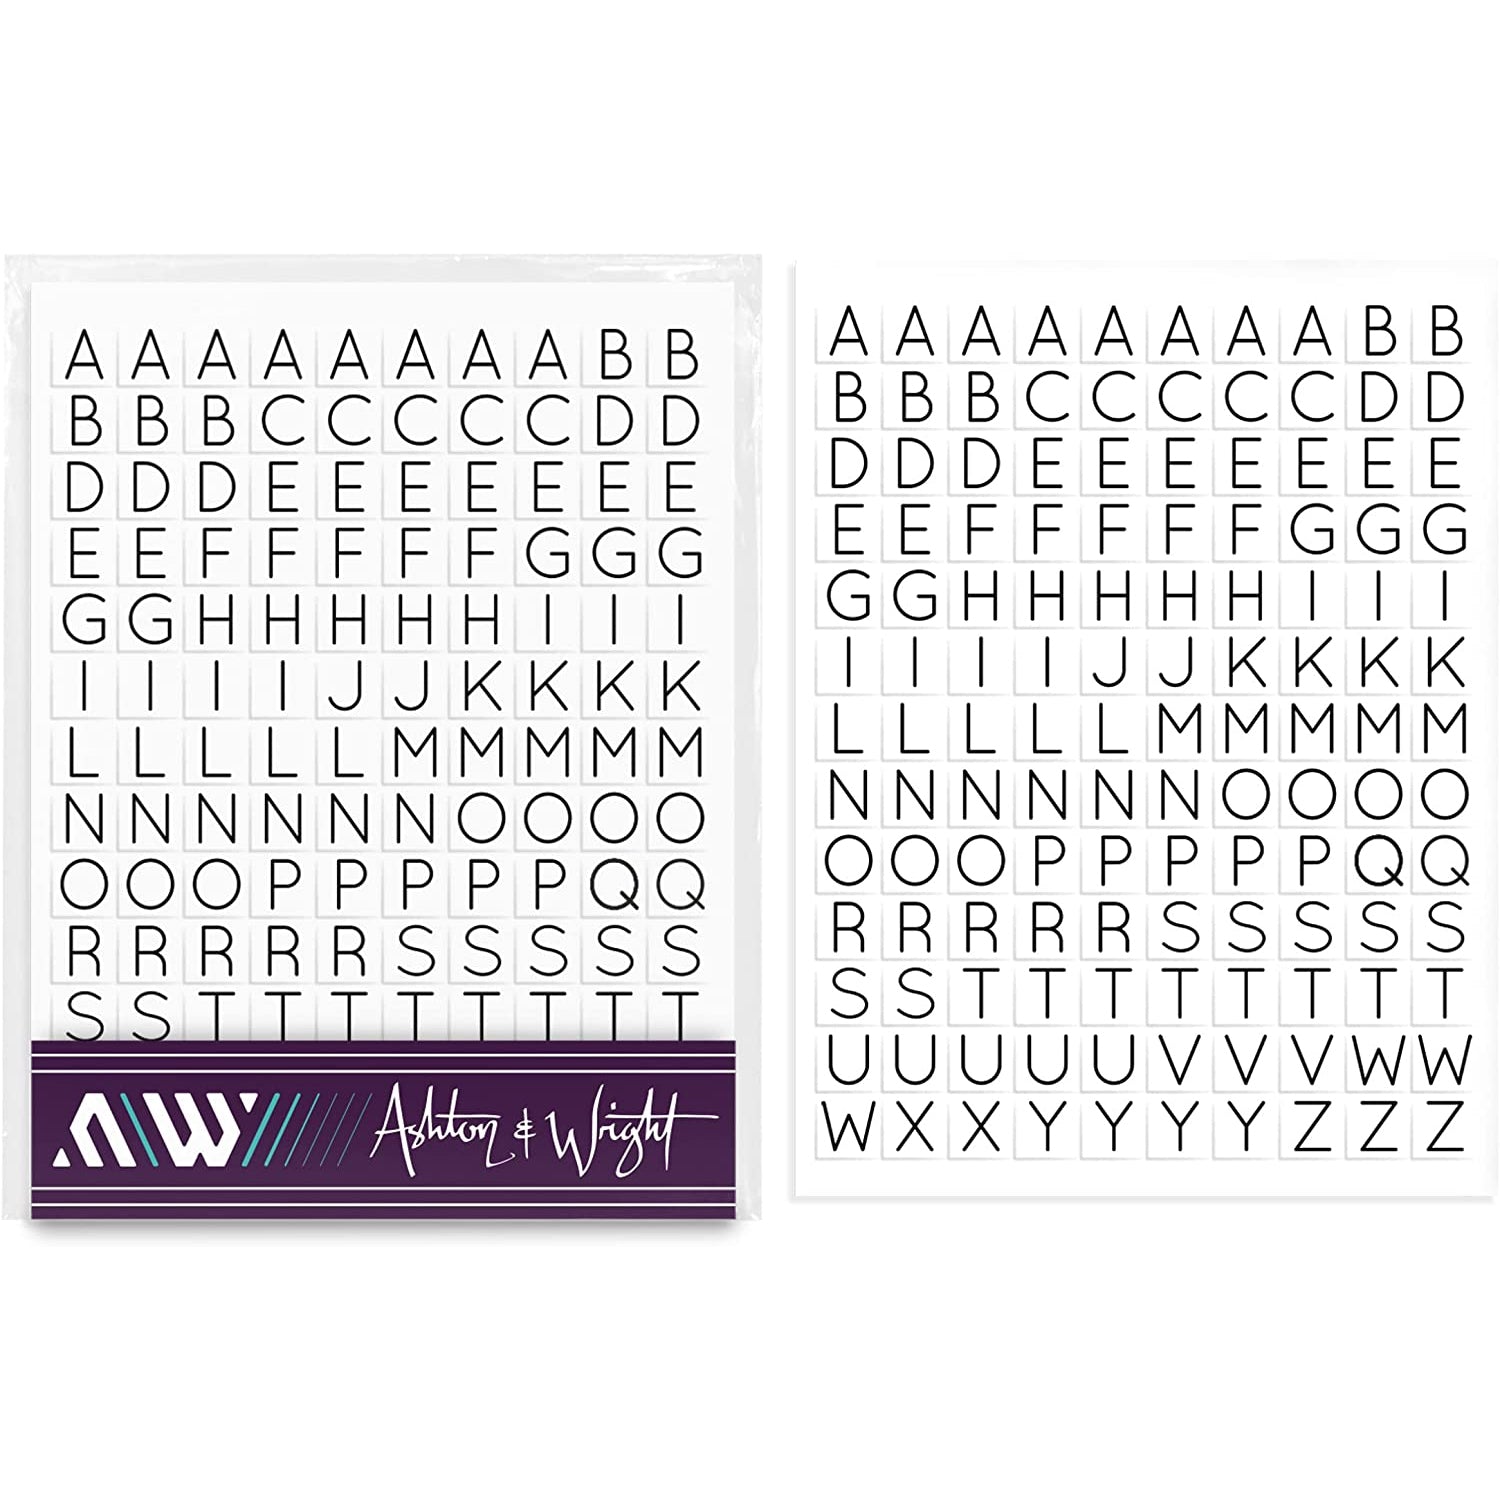 A-Z Alphabetical Letter Stickers - 8 x 8mm